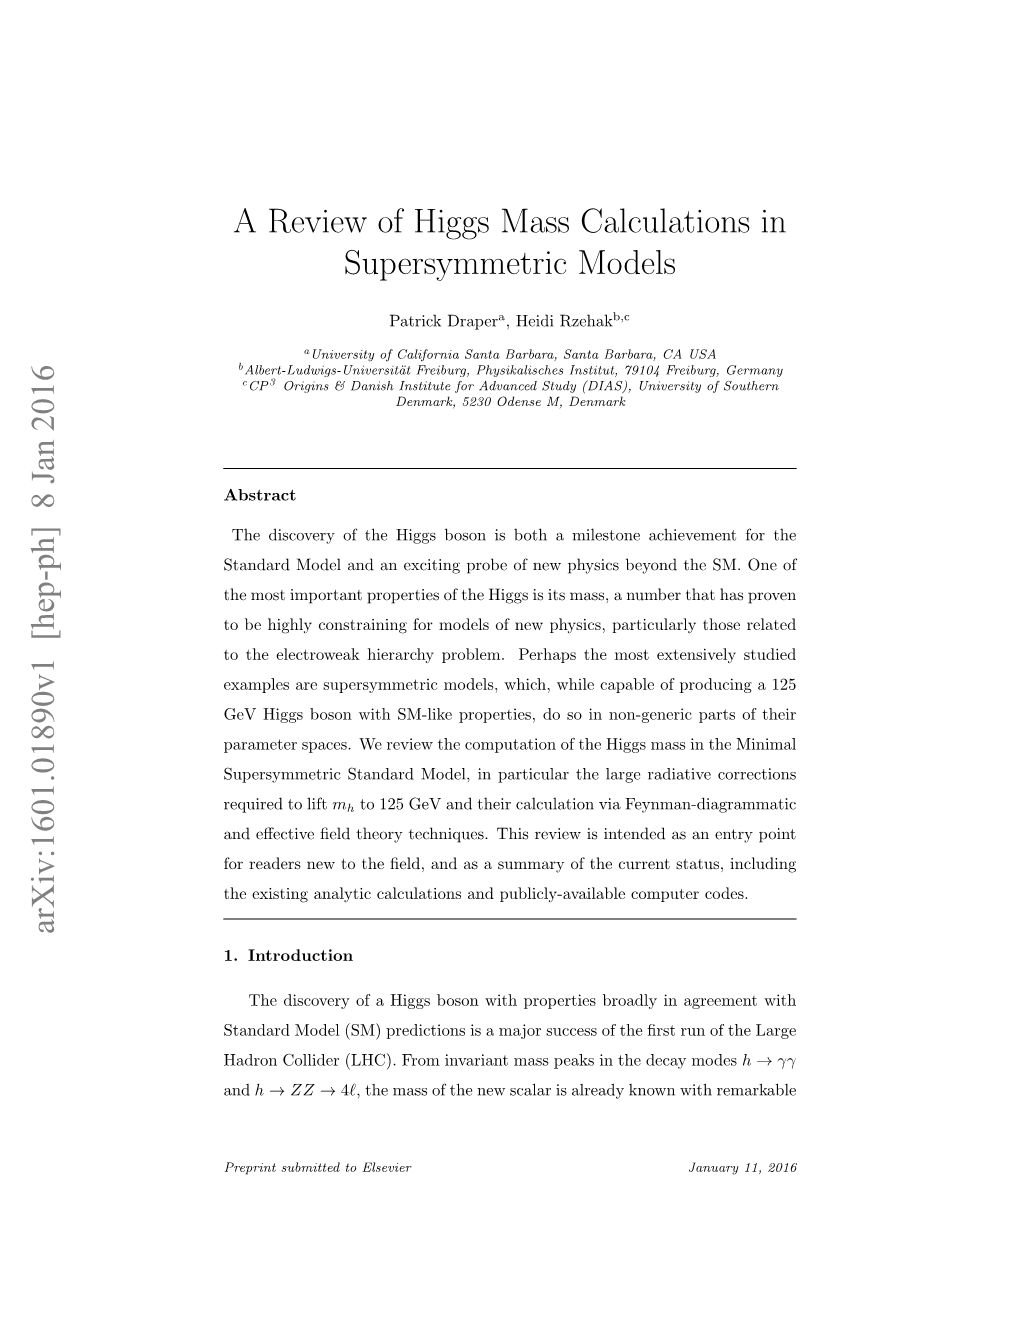 A Review of Higgs Mass Calculations in Supersymmetric Models Arxiv:1601.01890V1 [Hep-Ph] 8 Jan 2016